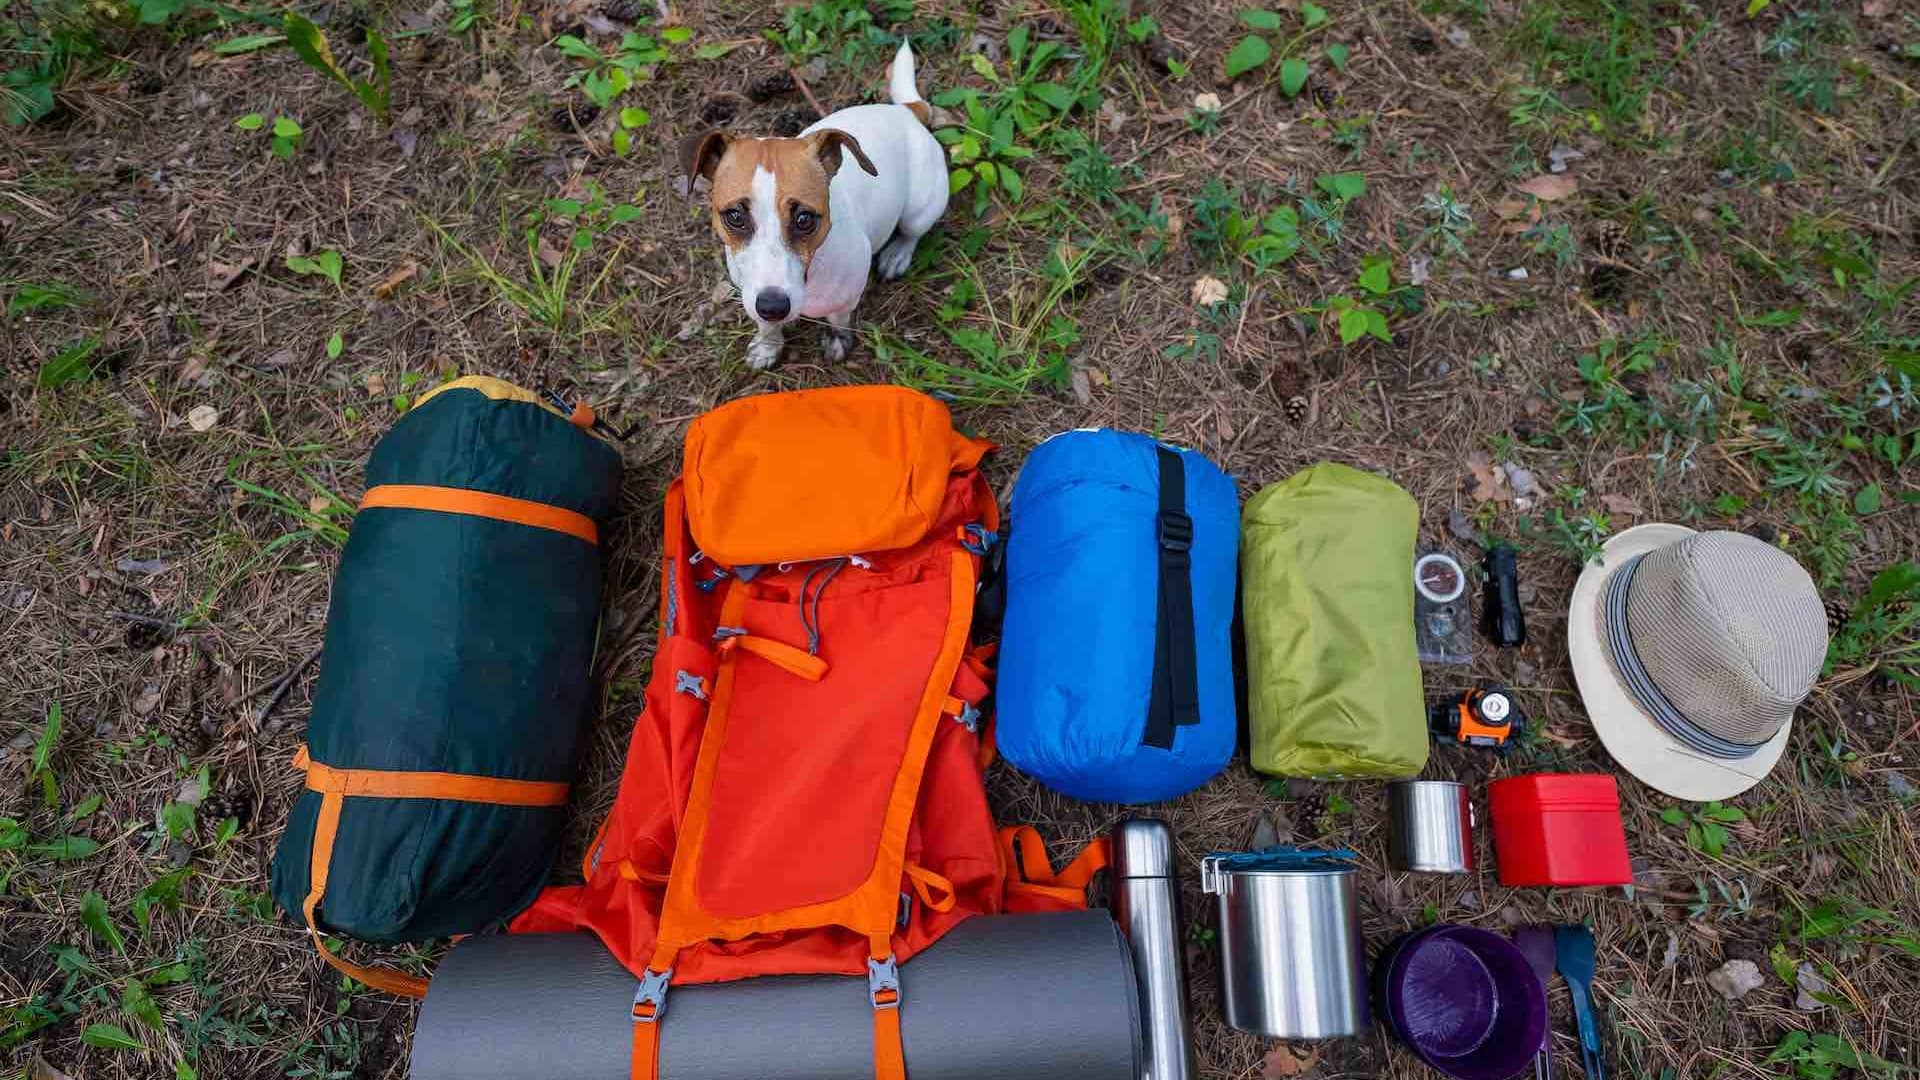 Jack Russell terrier sits next to camping gear.